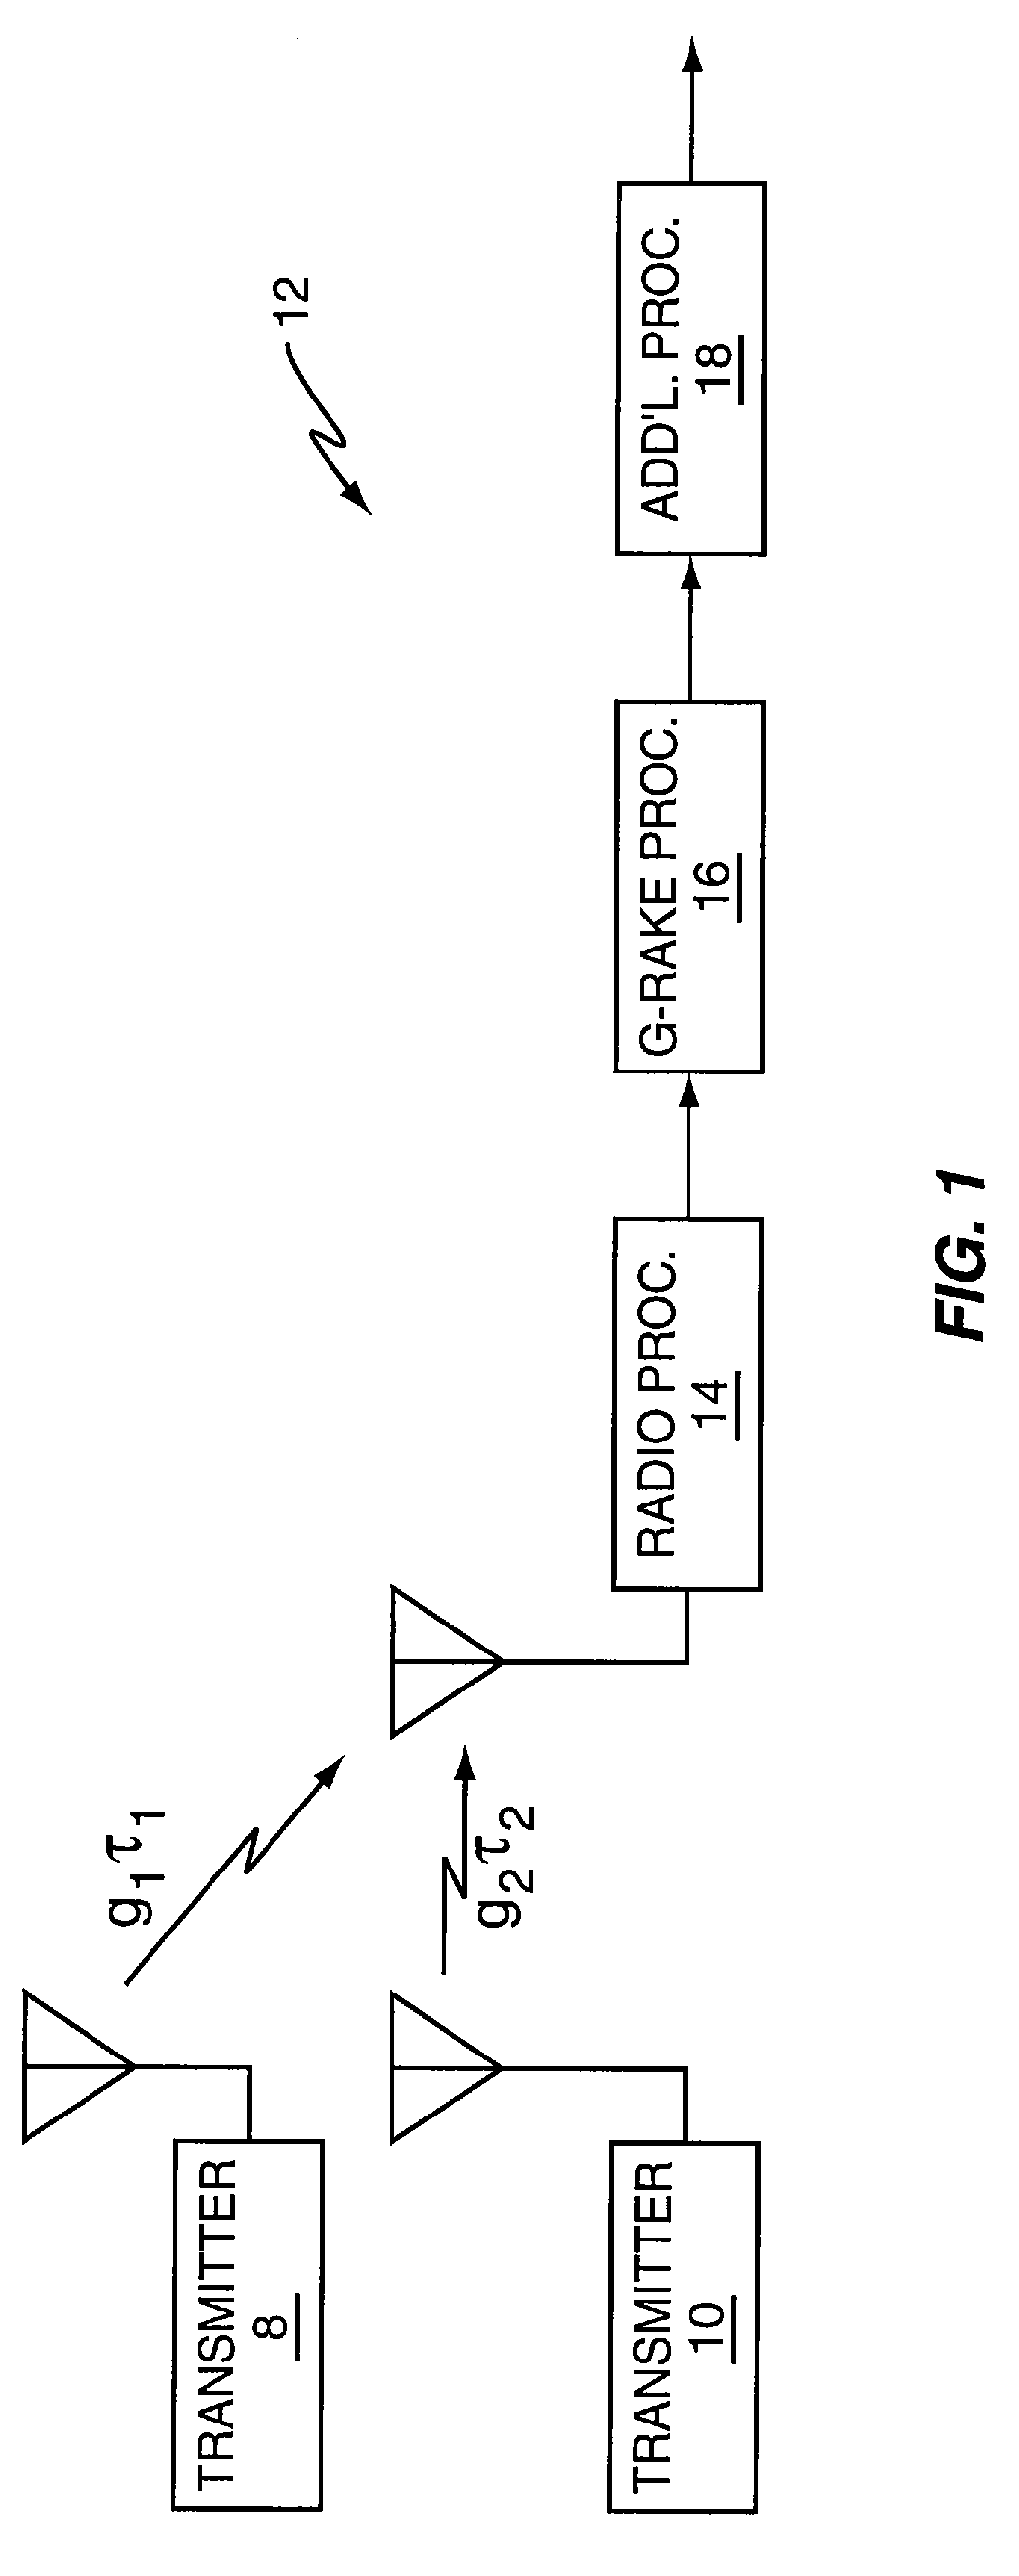 Method and Apparatus for Extended Least Squares Estimation for Generalized Rake Receiver Parameters Using Multiple Base Stations